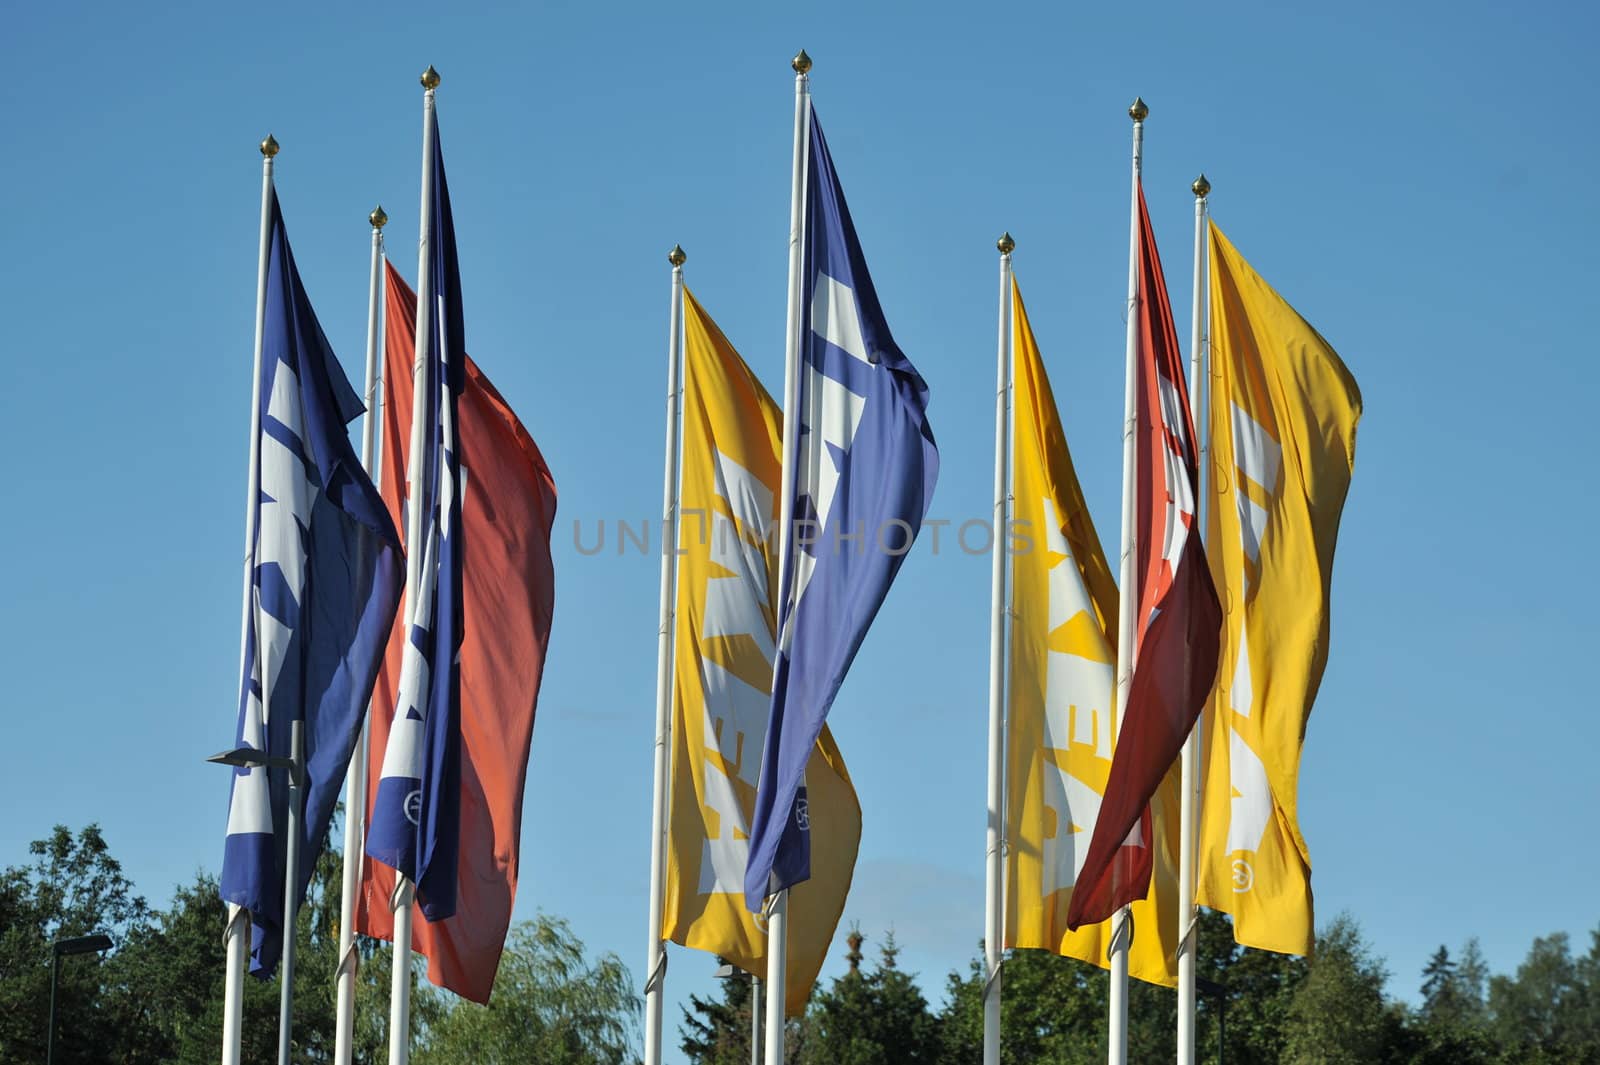 Flags in front of Ikeas megastore at Slependen Norway